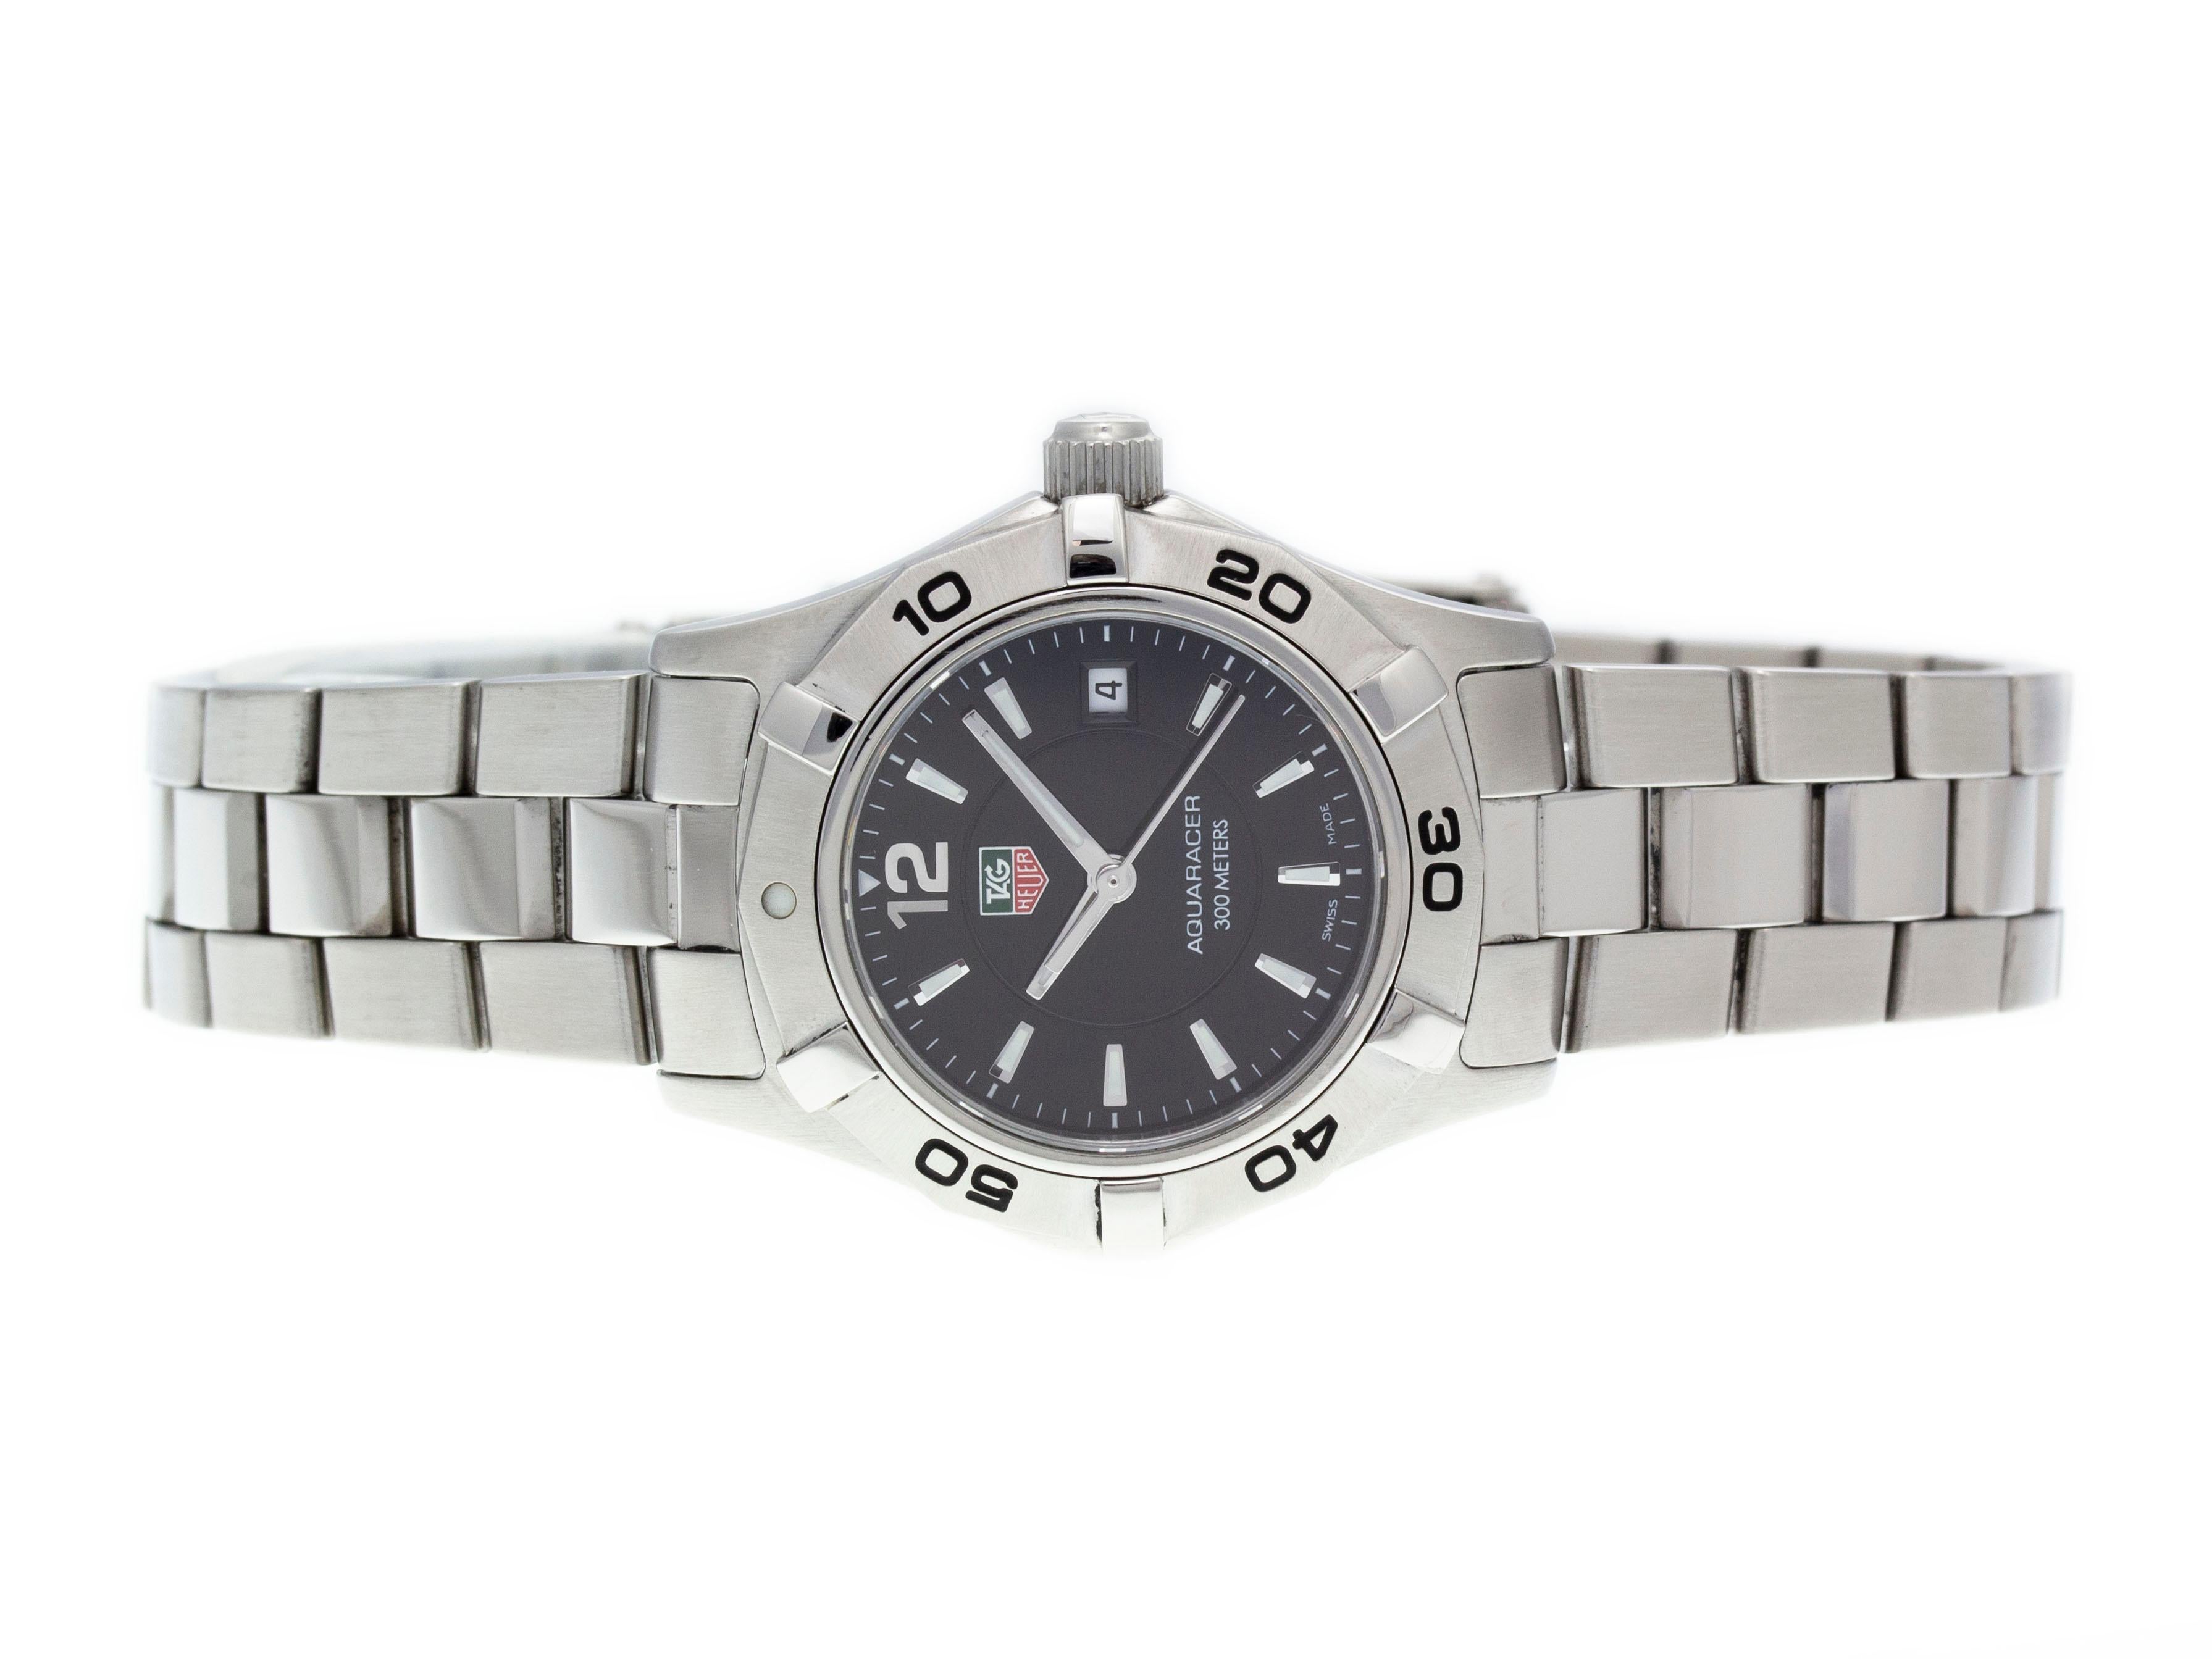 Stainless steel Tag Heuer Aquaracer quartz watch with a 27mm case, black dial, and bracelet with folding clasp. Features include hours, minutes, seconds and date. Comes with a Tag Box and 2 Year Store Warranty.​

Brand	Tag